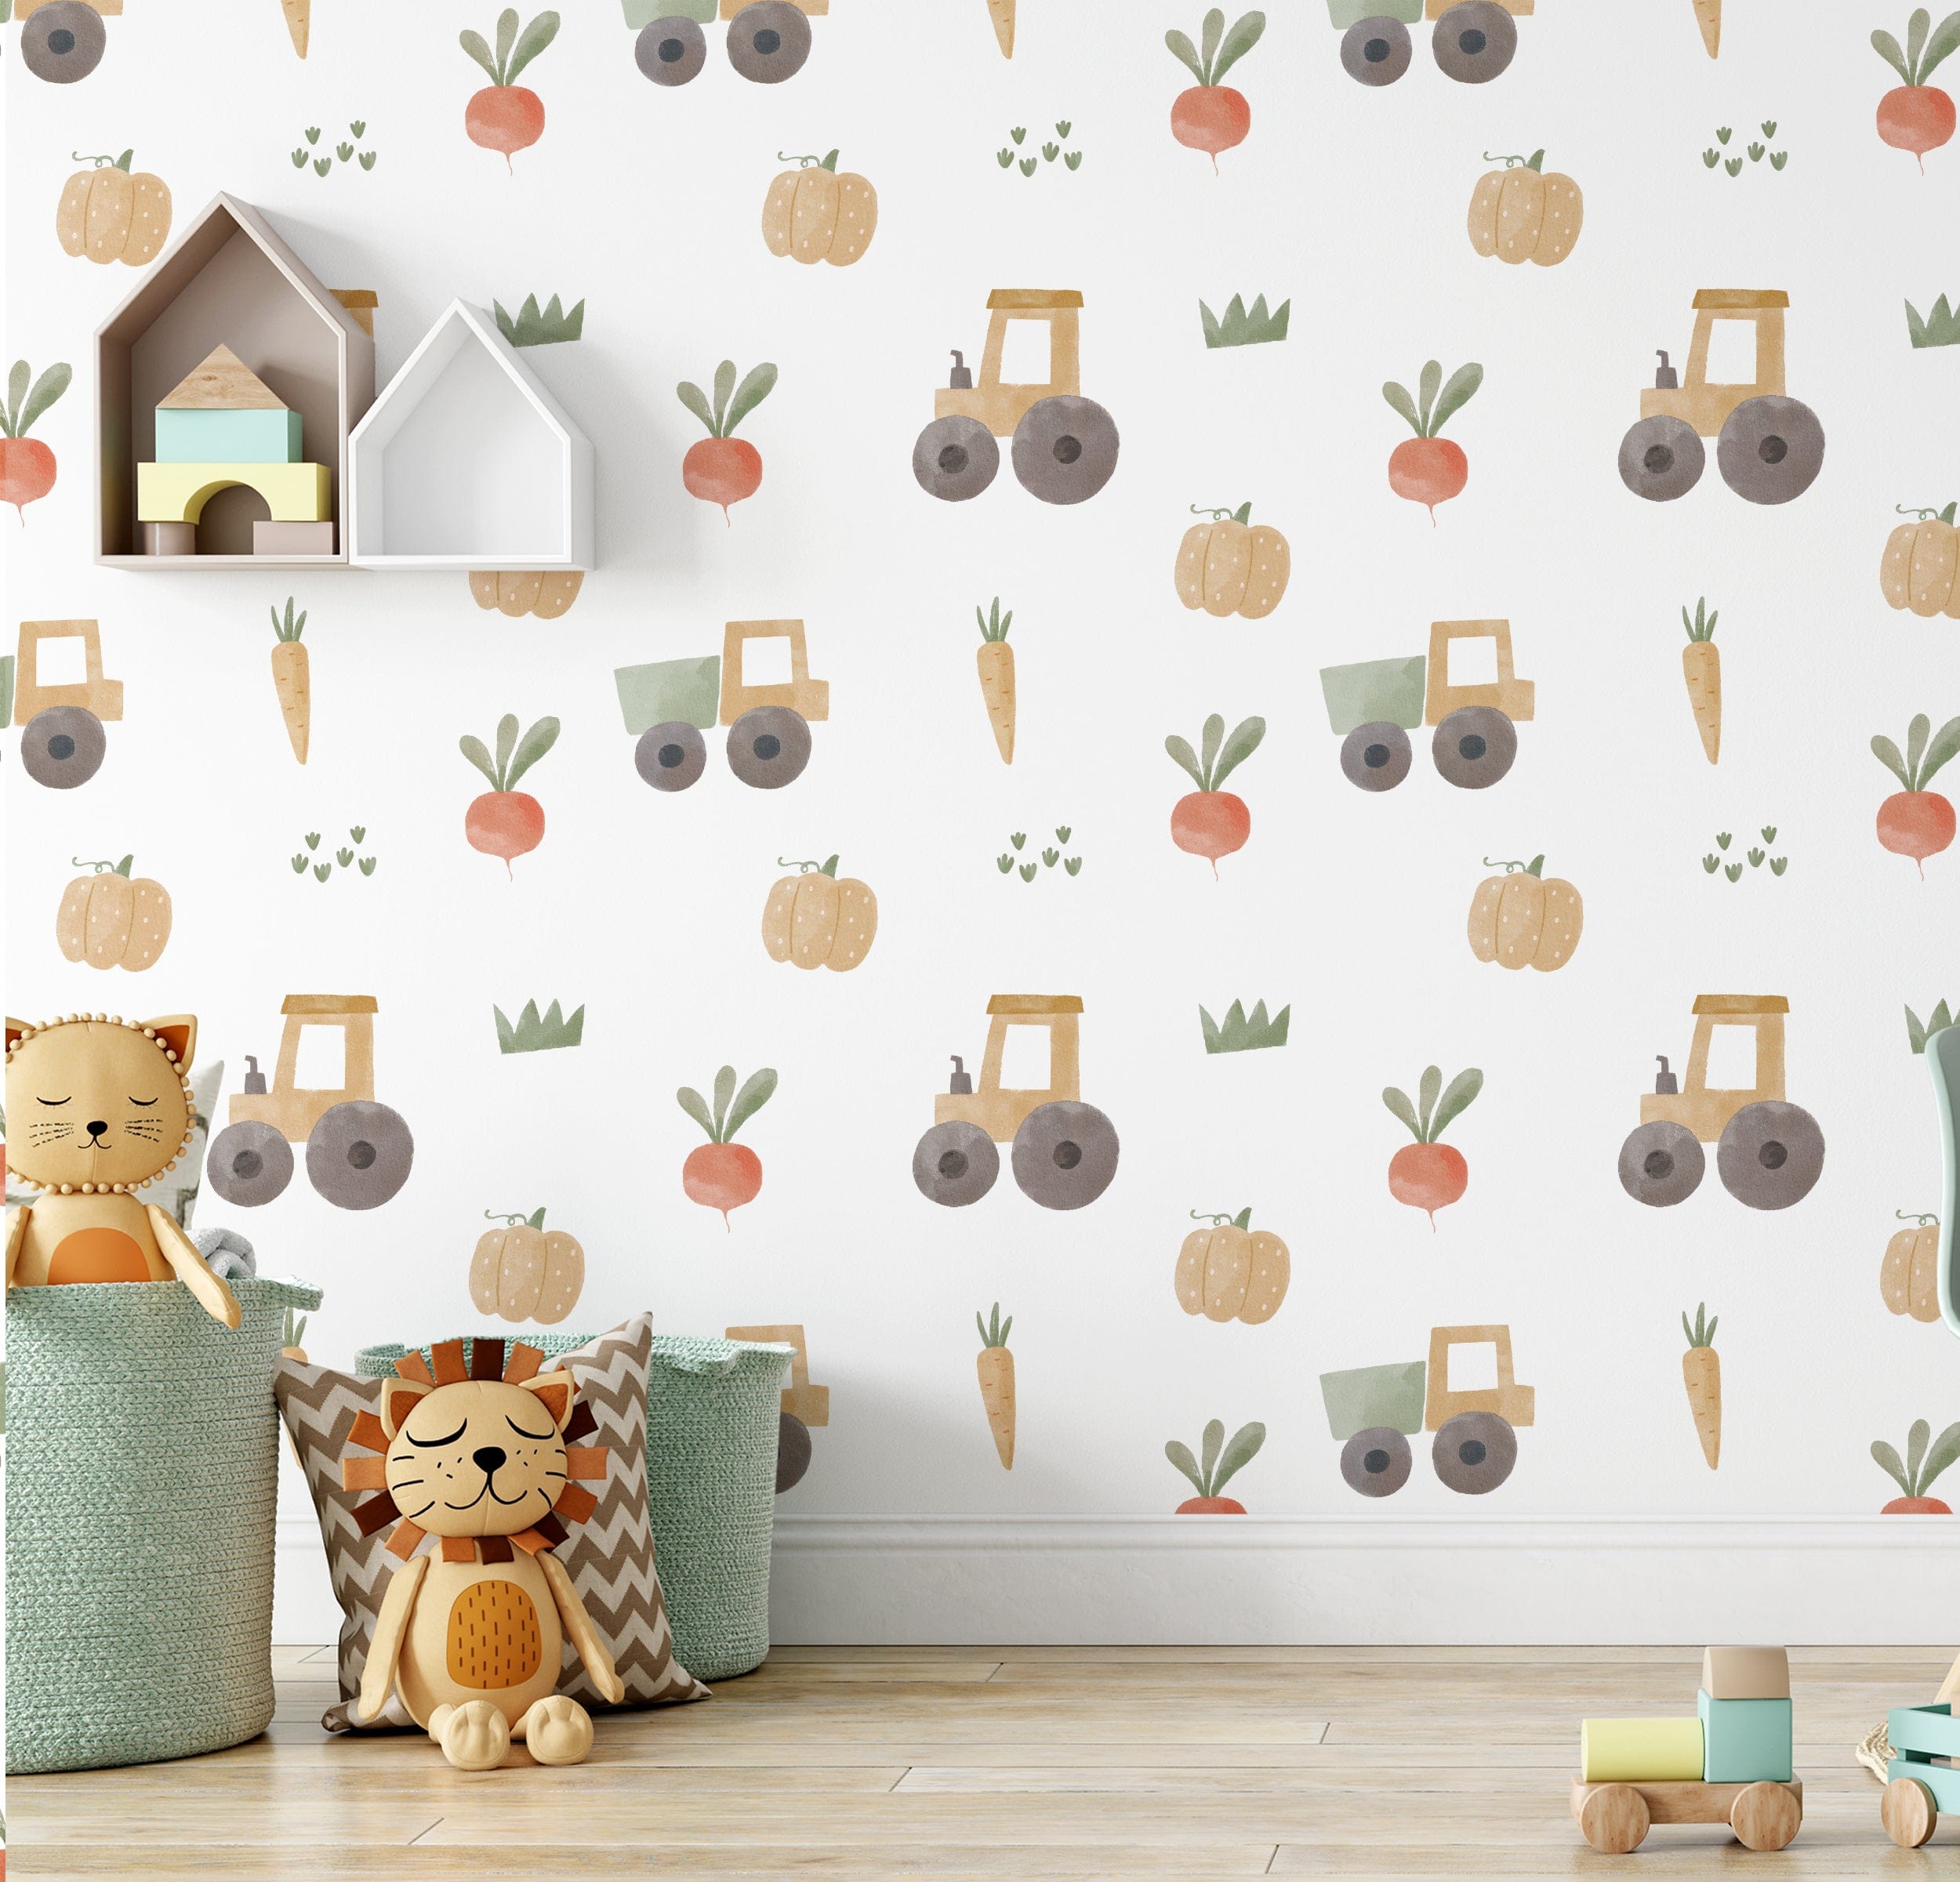 A children's playroom decorated with Farm Friend Wallpaper - Happy Veggies, featuring whimsical illustrations of tractors, pumpkins, carrots, radishes, and grass, creating a playful and colorful atmosphere.